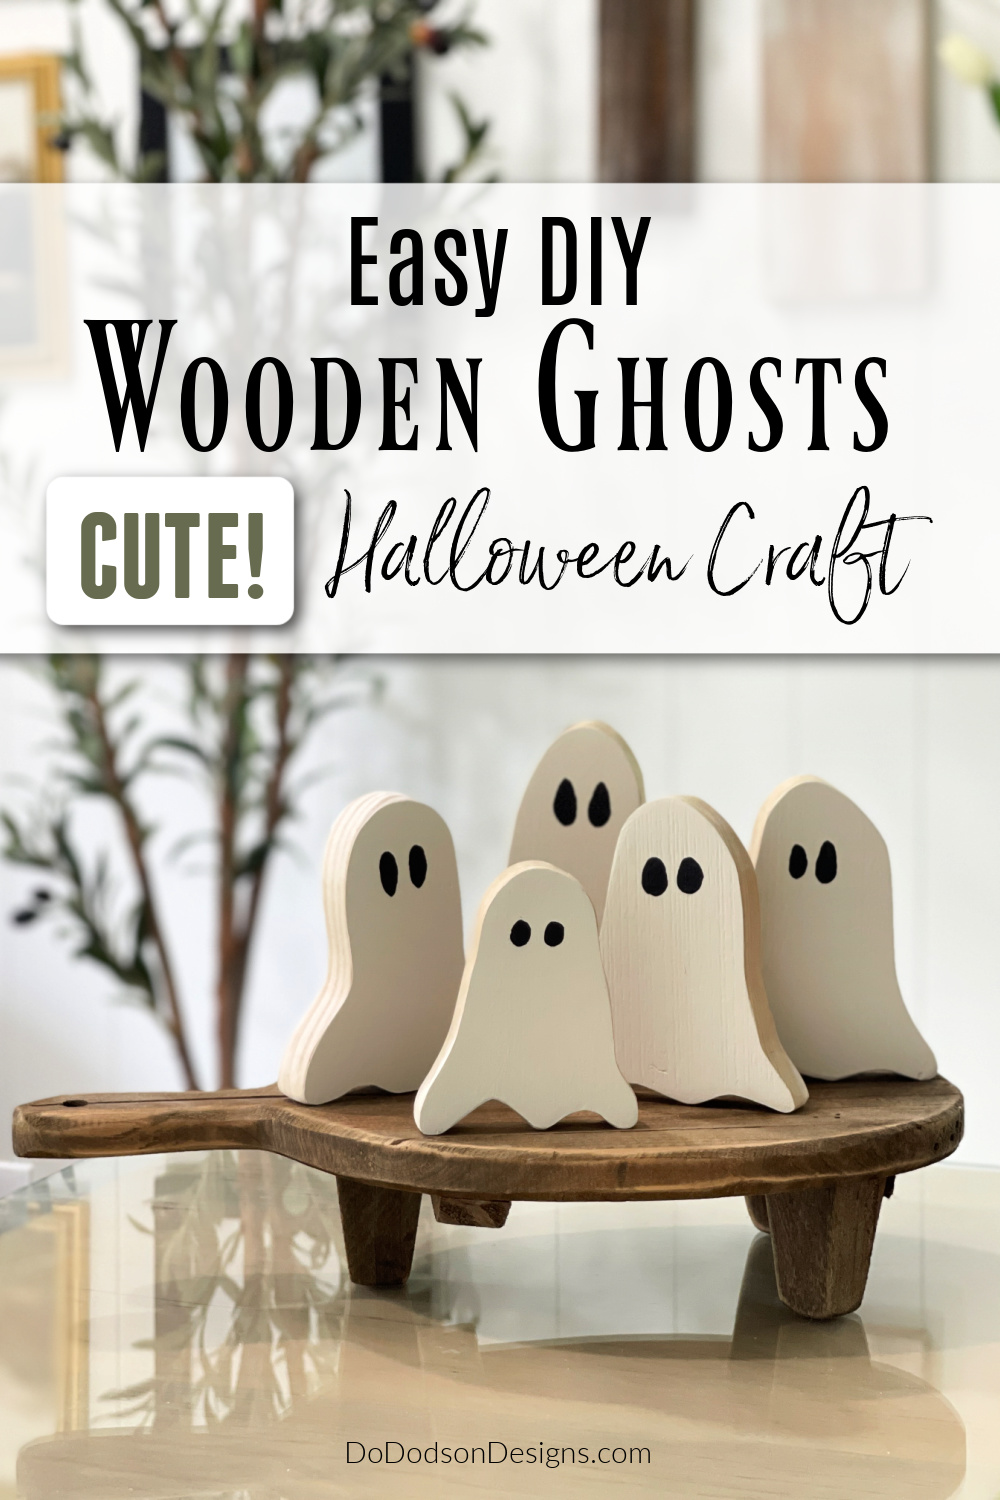 How To Make DIY Wooden Ghosts (Easy Halloween Craft)